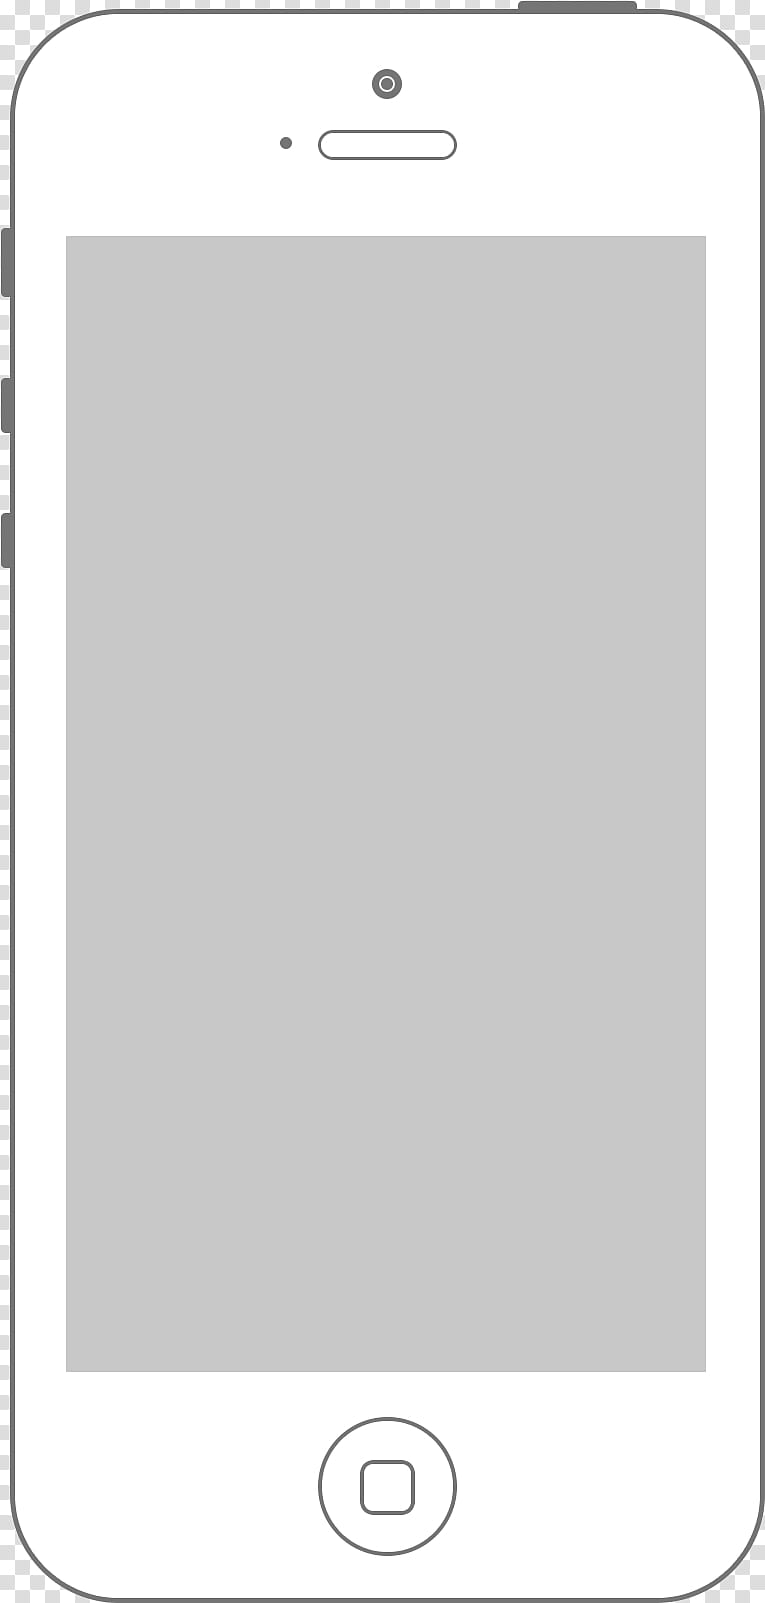 Iphone X, Apple, IPad 4, Space Grey, Smartphone, Mobile Phones, Apple Ipad Family, Tablet Computers transparent background PNG clipart